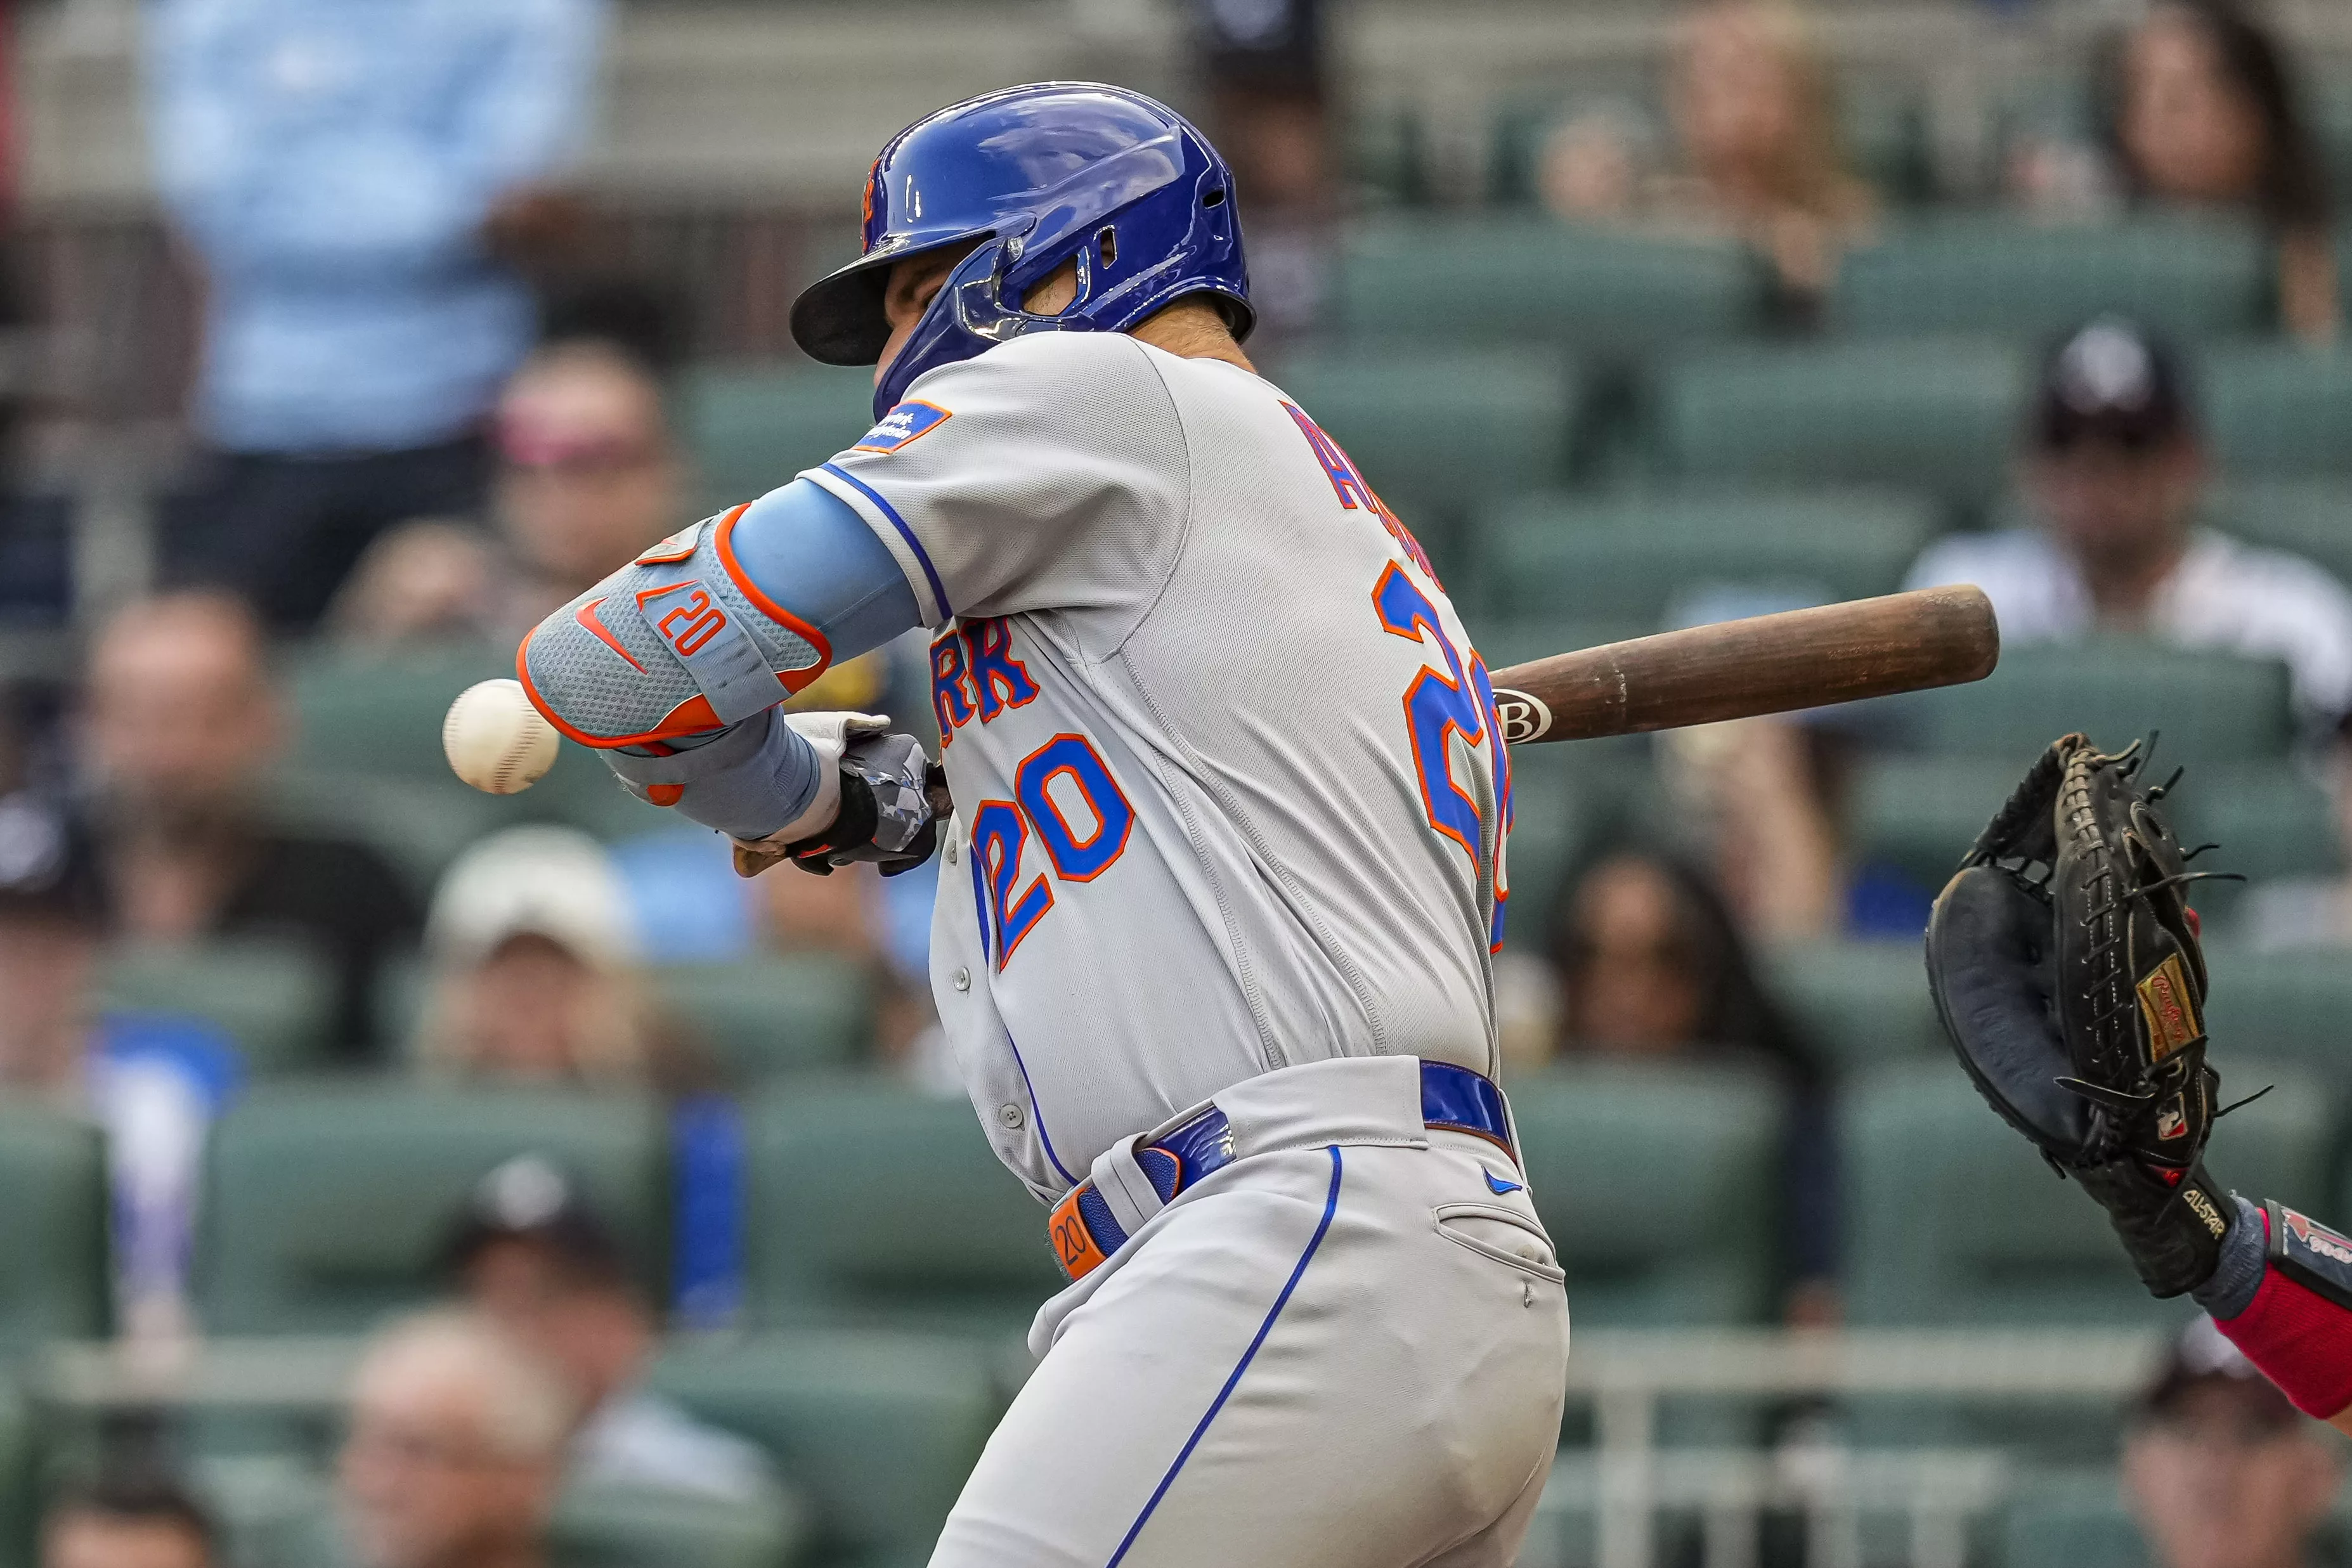 Mets' Pete Alonso Leaves Game vs. Braves with Wrist Injury After